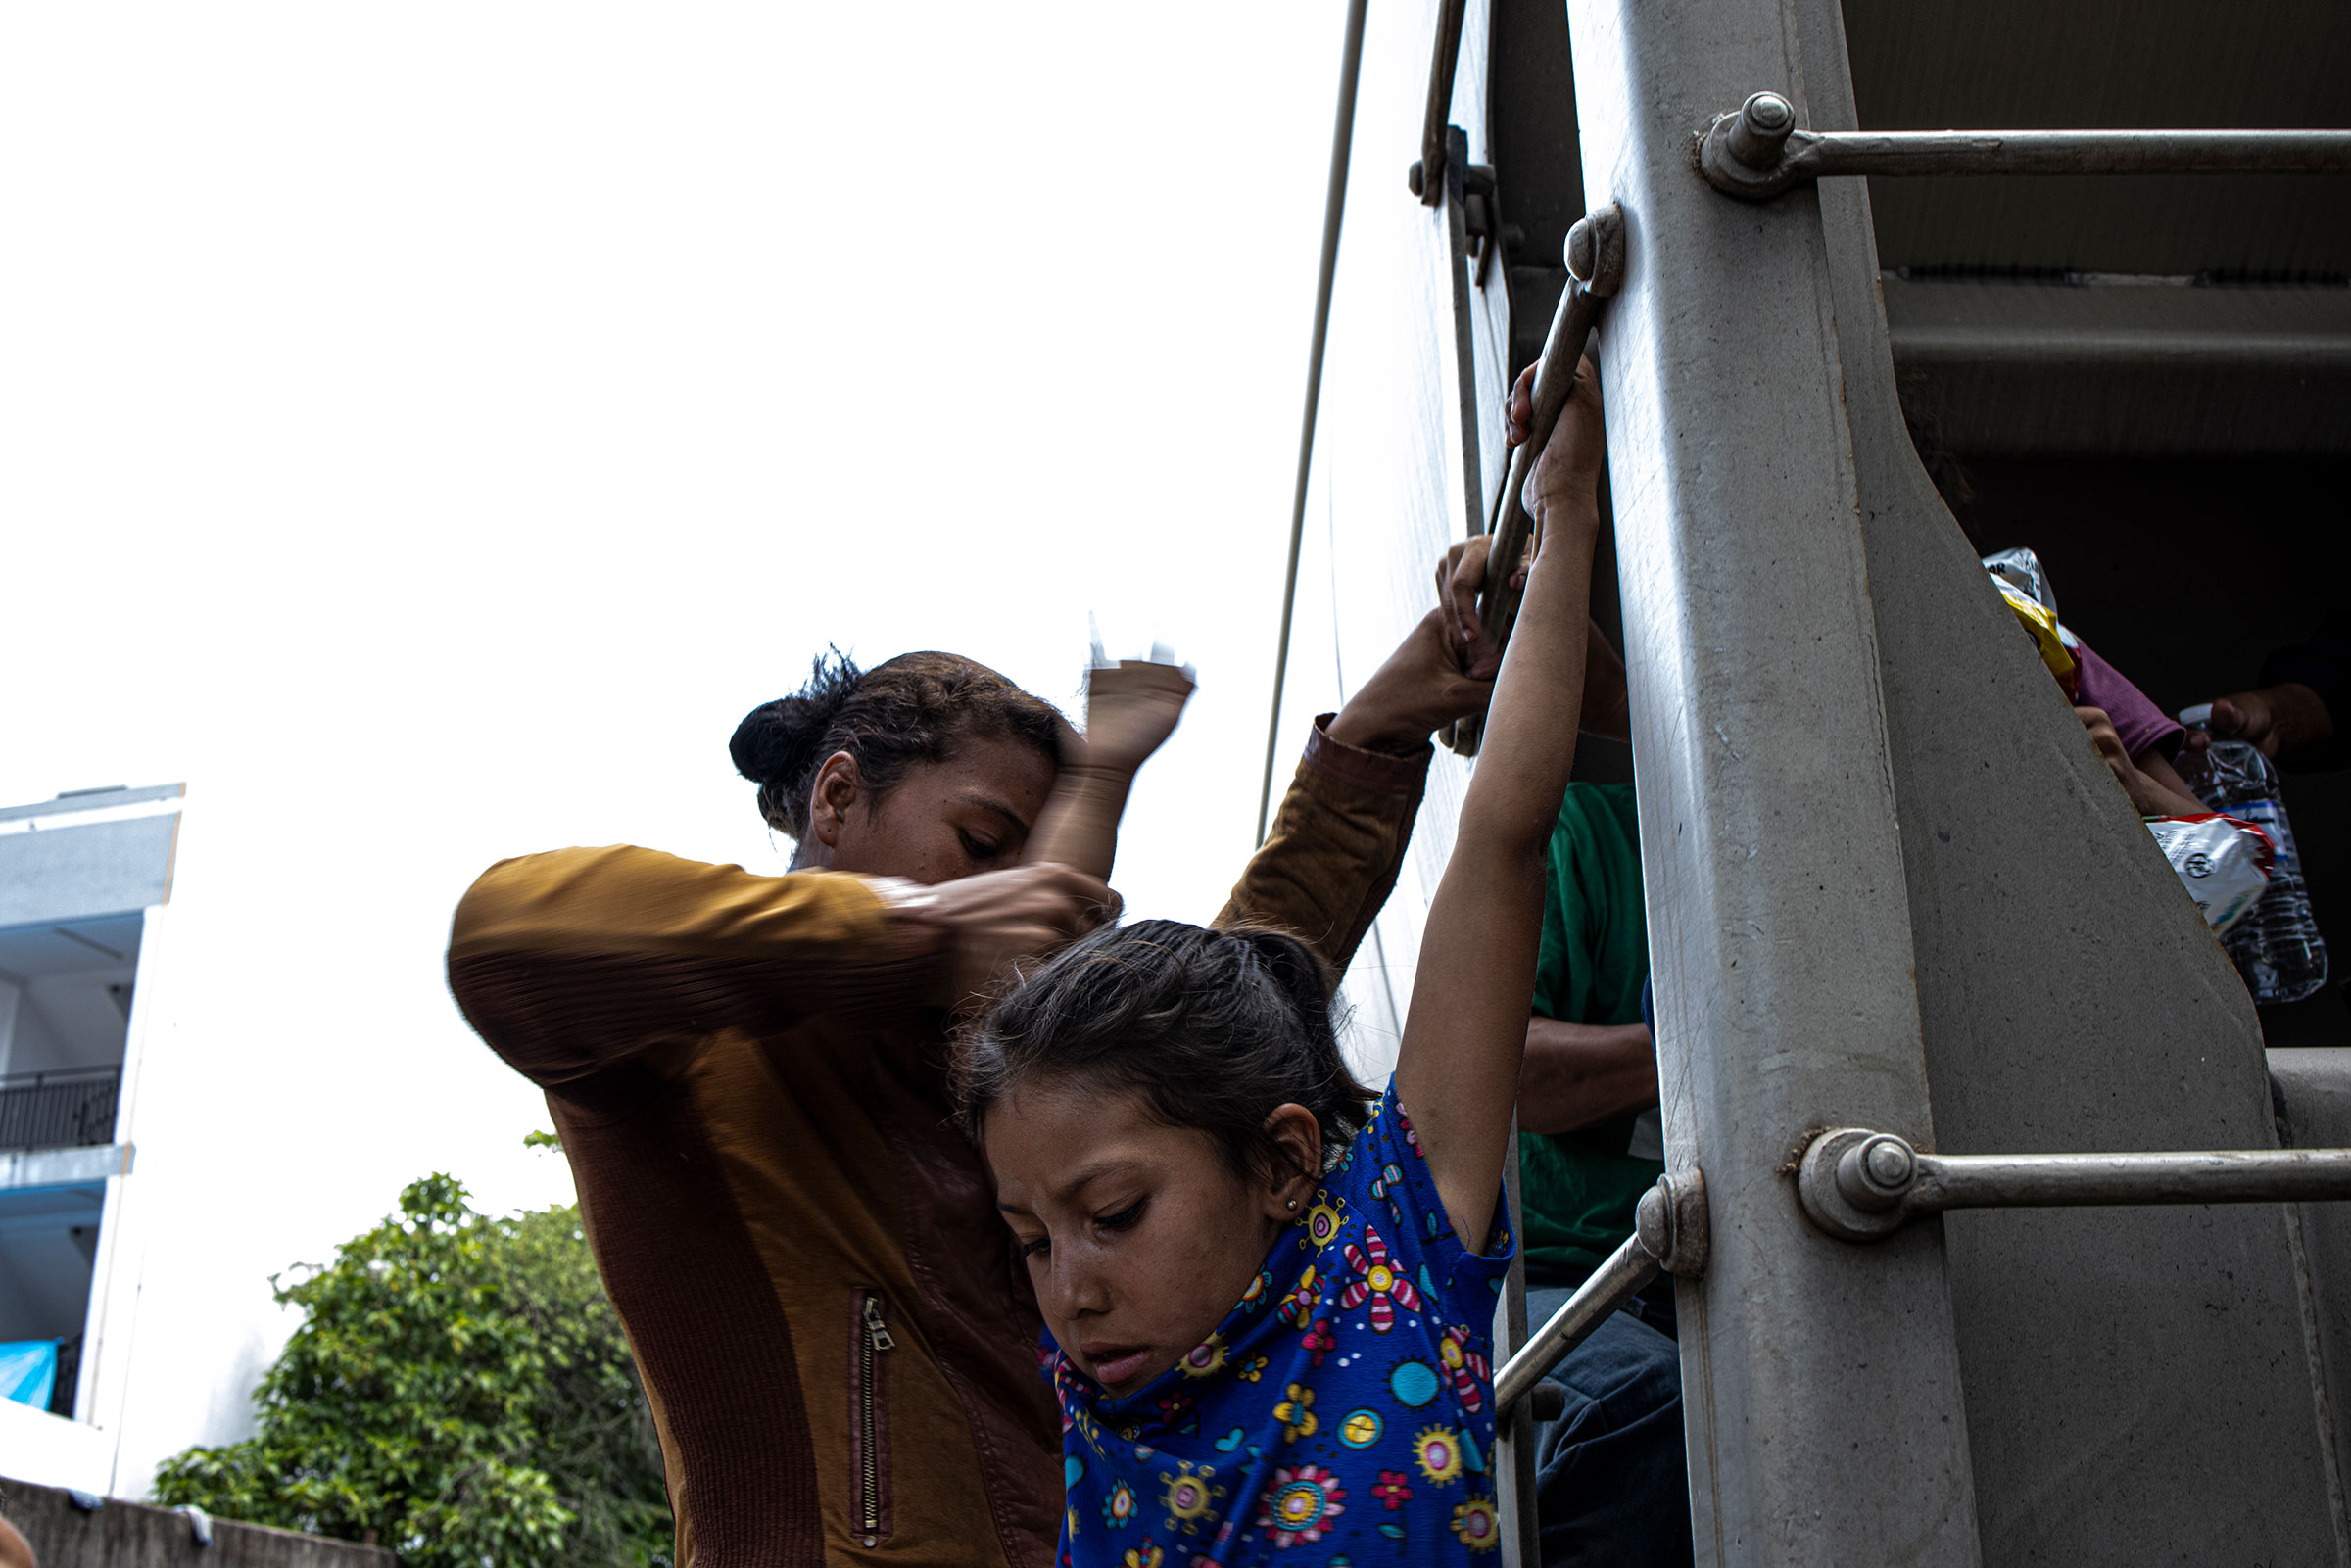 A mother helps her young daughter get off a train in Coatzacoalcos, in the Mexican state of Veracruz on March 22, 2021. Family units have been arriving at the U.S.-Mexico border at an increasing rate since January 2019, according to U.S. Customs and Border Protection data. (Yael Martínez—Magnum Photos for TIME)